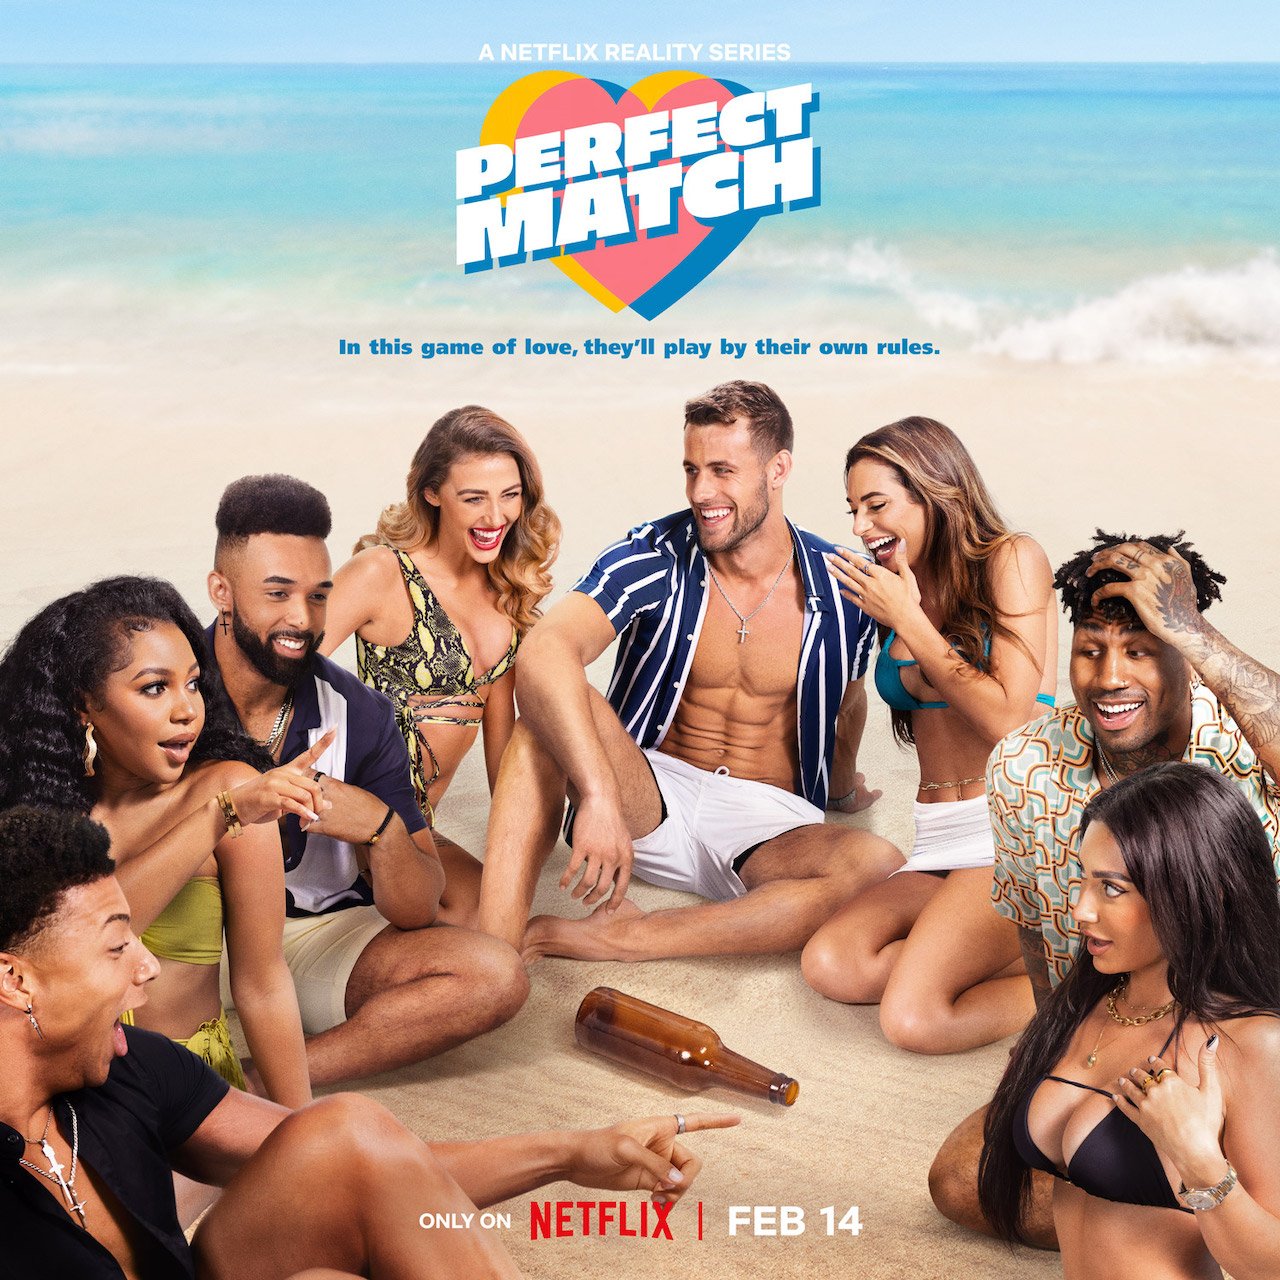 Chase DeMoor, Anne-Sophie Petit-Frere, Bartise Bowden, Chloe Veitch, Georgia Hassarati, Mitchell Eason, Dom Gabriel, and Francesca Farago sit in a circle on a beach for 'Perfect Match'.